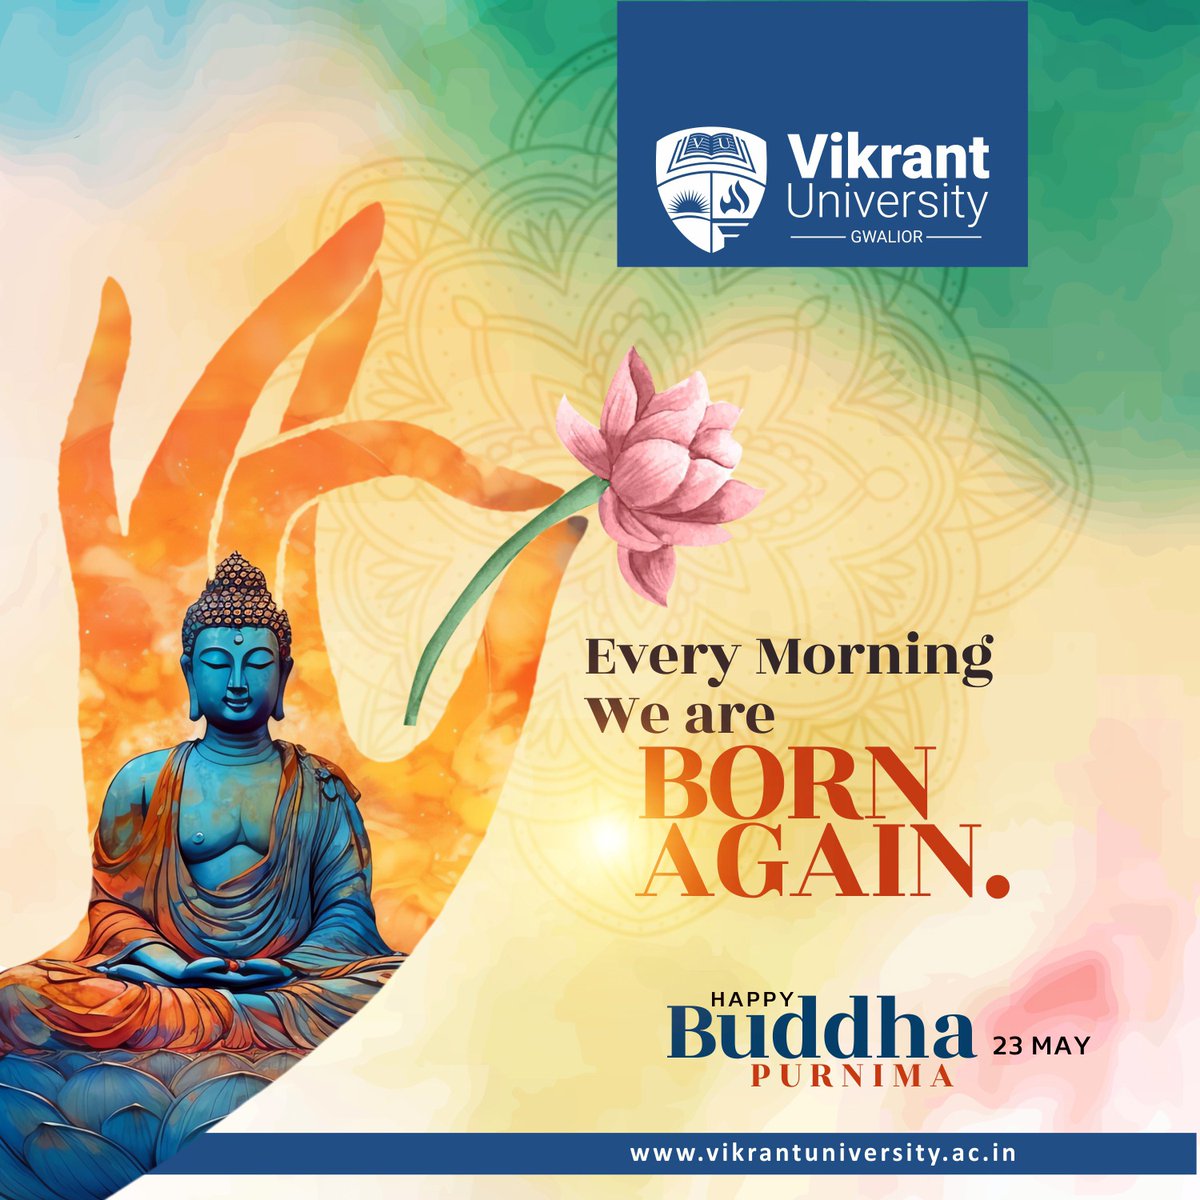 May the teachings of Lord Buddha guide everyone towards peace, harmony, and inner happiness.

Happy Buddha Purnima!

#budhpurnima #budhpoornima #budhpoornima2024 #VikrantUniversity #VikrantGroupofInstitutions #Gwalior #Indore #MadhyaPradesh #India